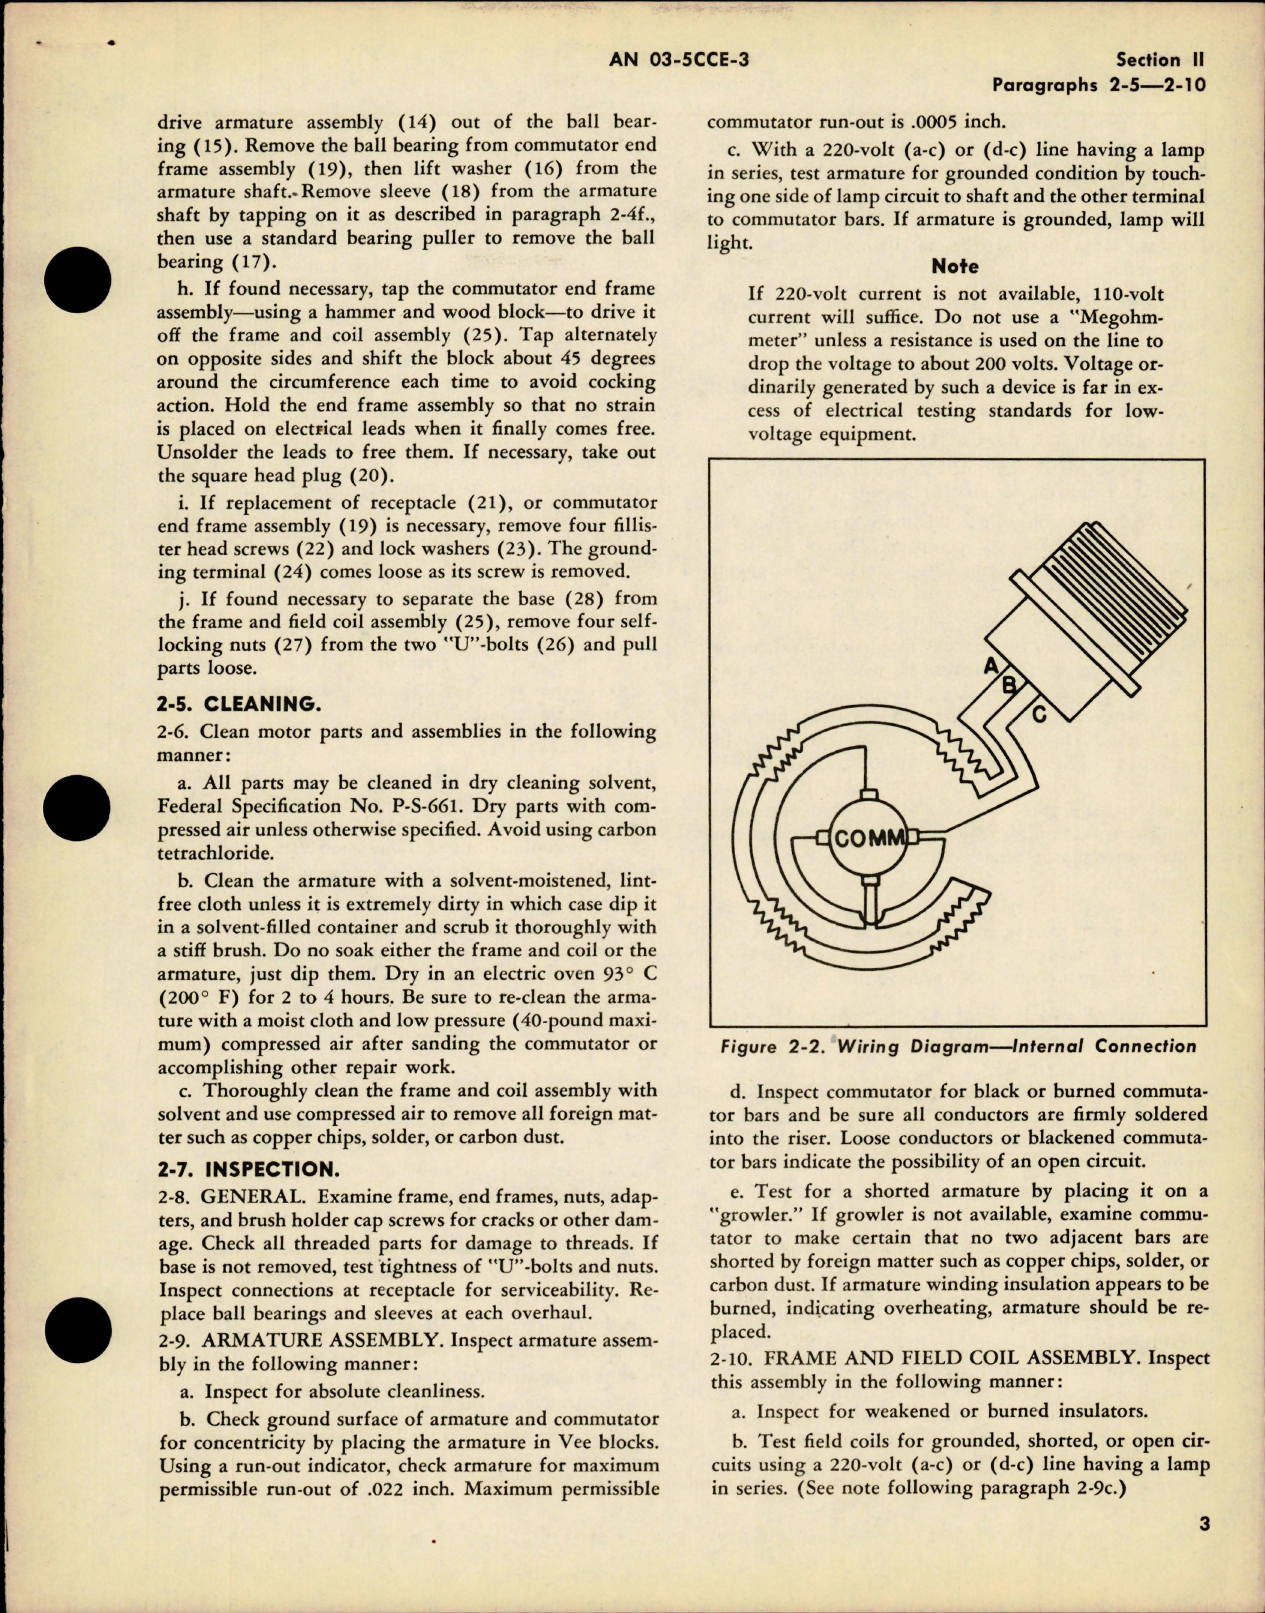 Sample page 5 from AirCorps Library document: Overhaul Instructions for Windshield Wiper Motors - A-7012 and A-7531